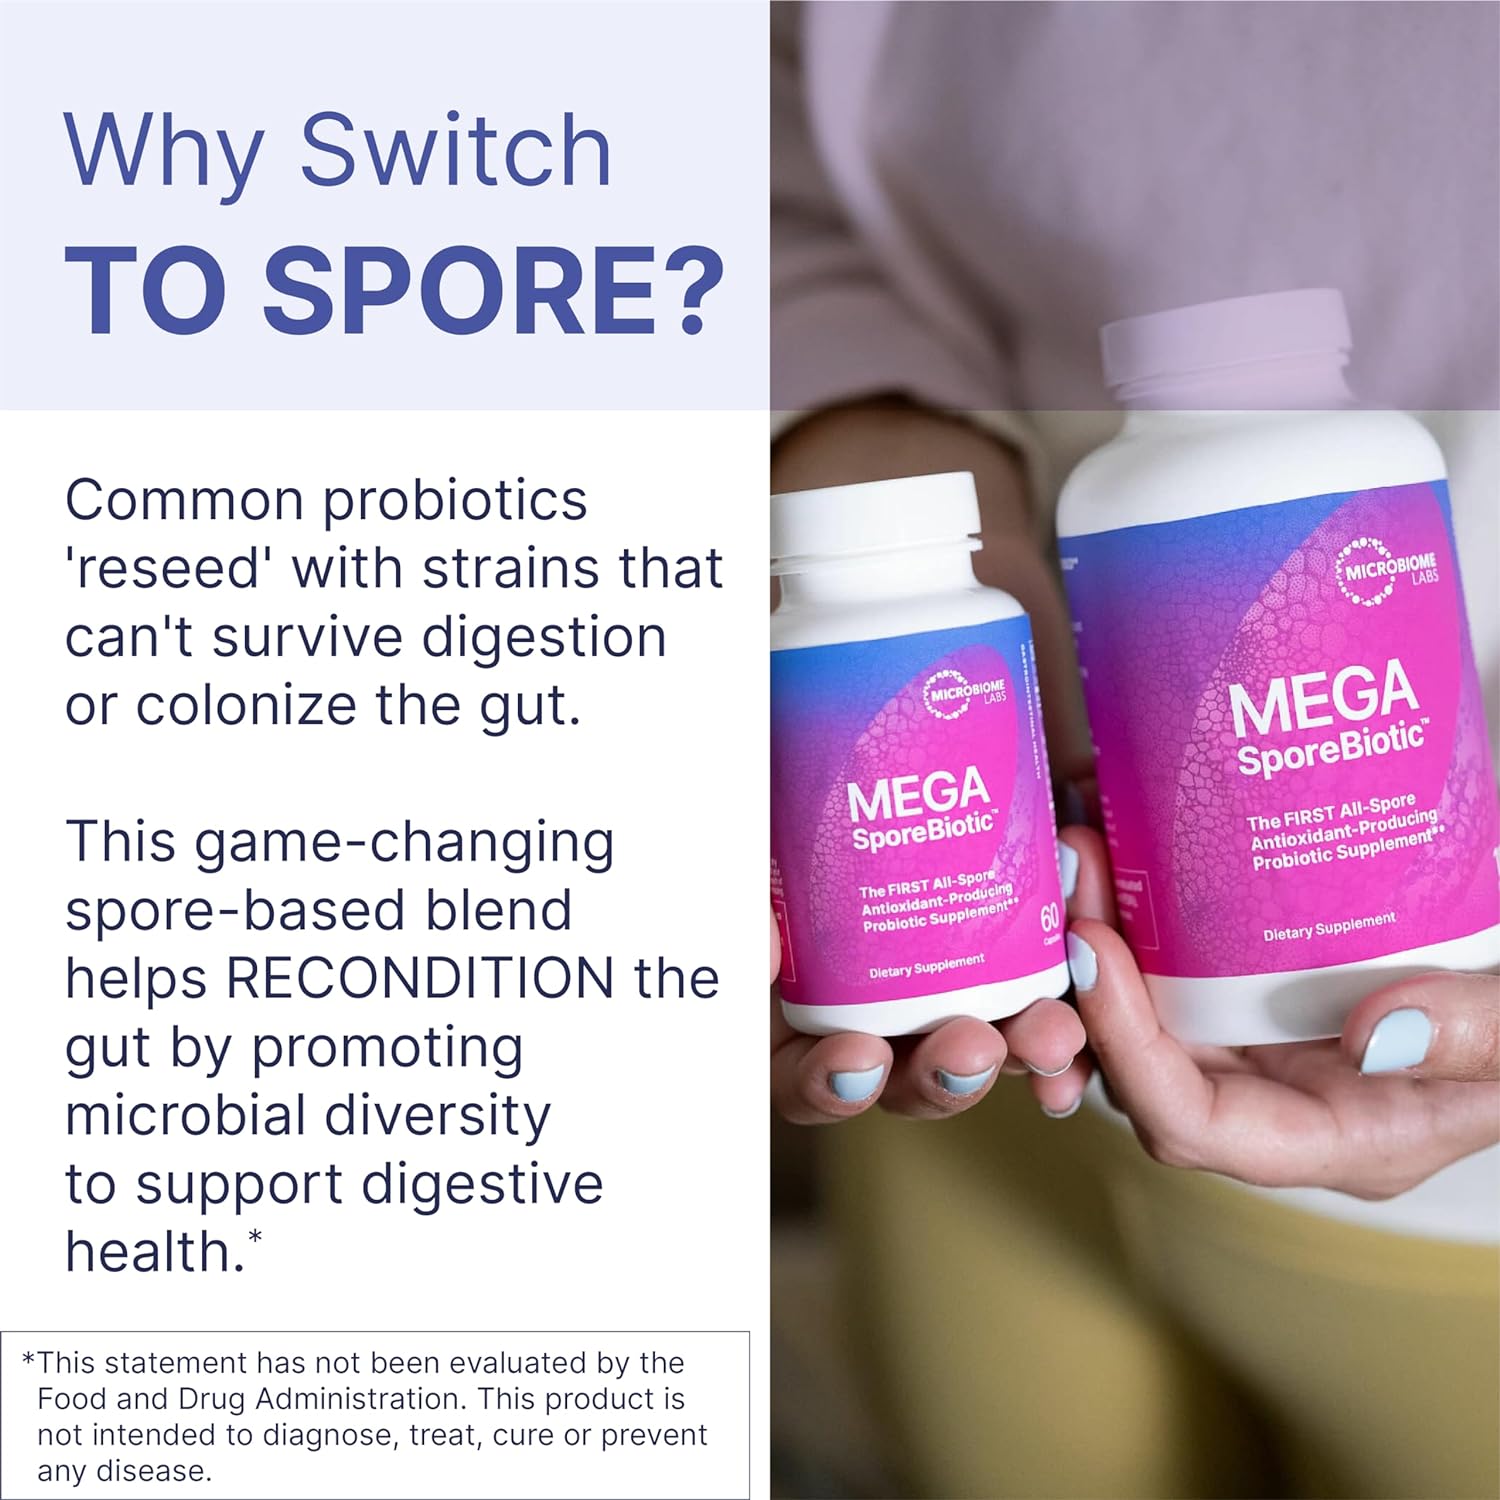 Microbiome Labs MegaSporeBiotic Spore-Based Probiotics (60 Capsules) + MegaMarine Fish Oil Supplement - Omega 3 Pills with EPA DHA DPA Ratio to Support Immune  Gut Health (60 Softgels) - 2 Products